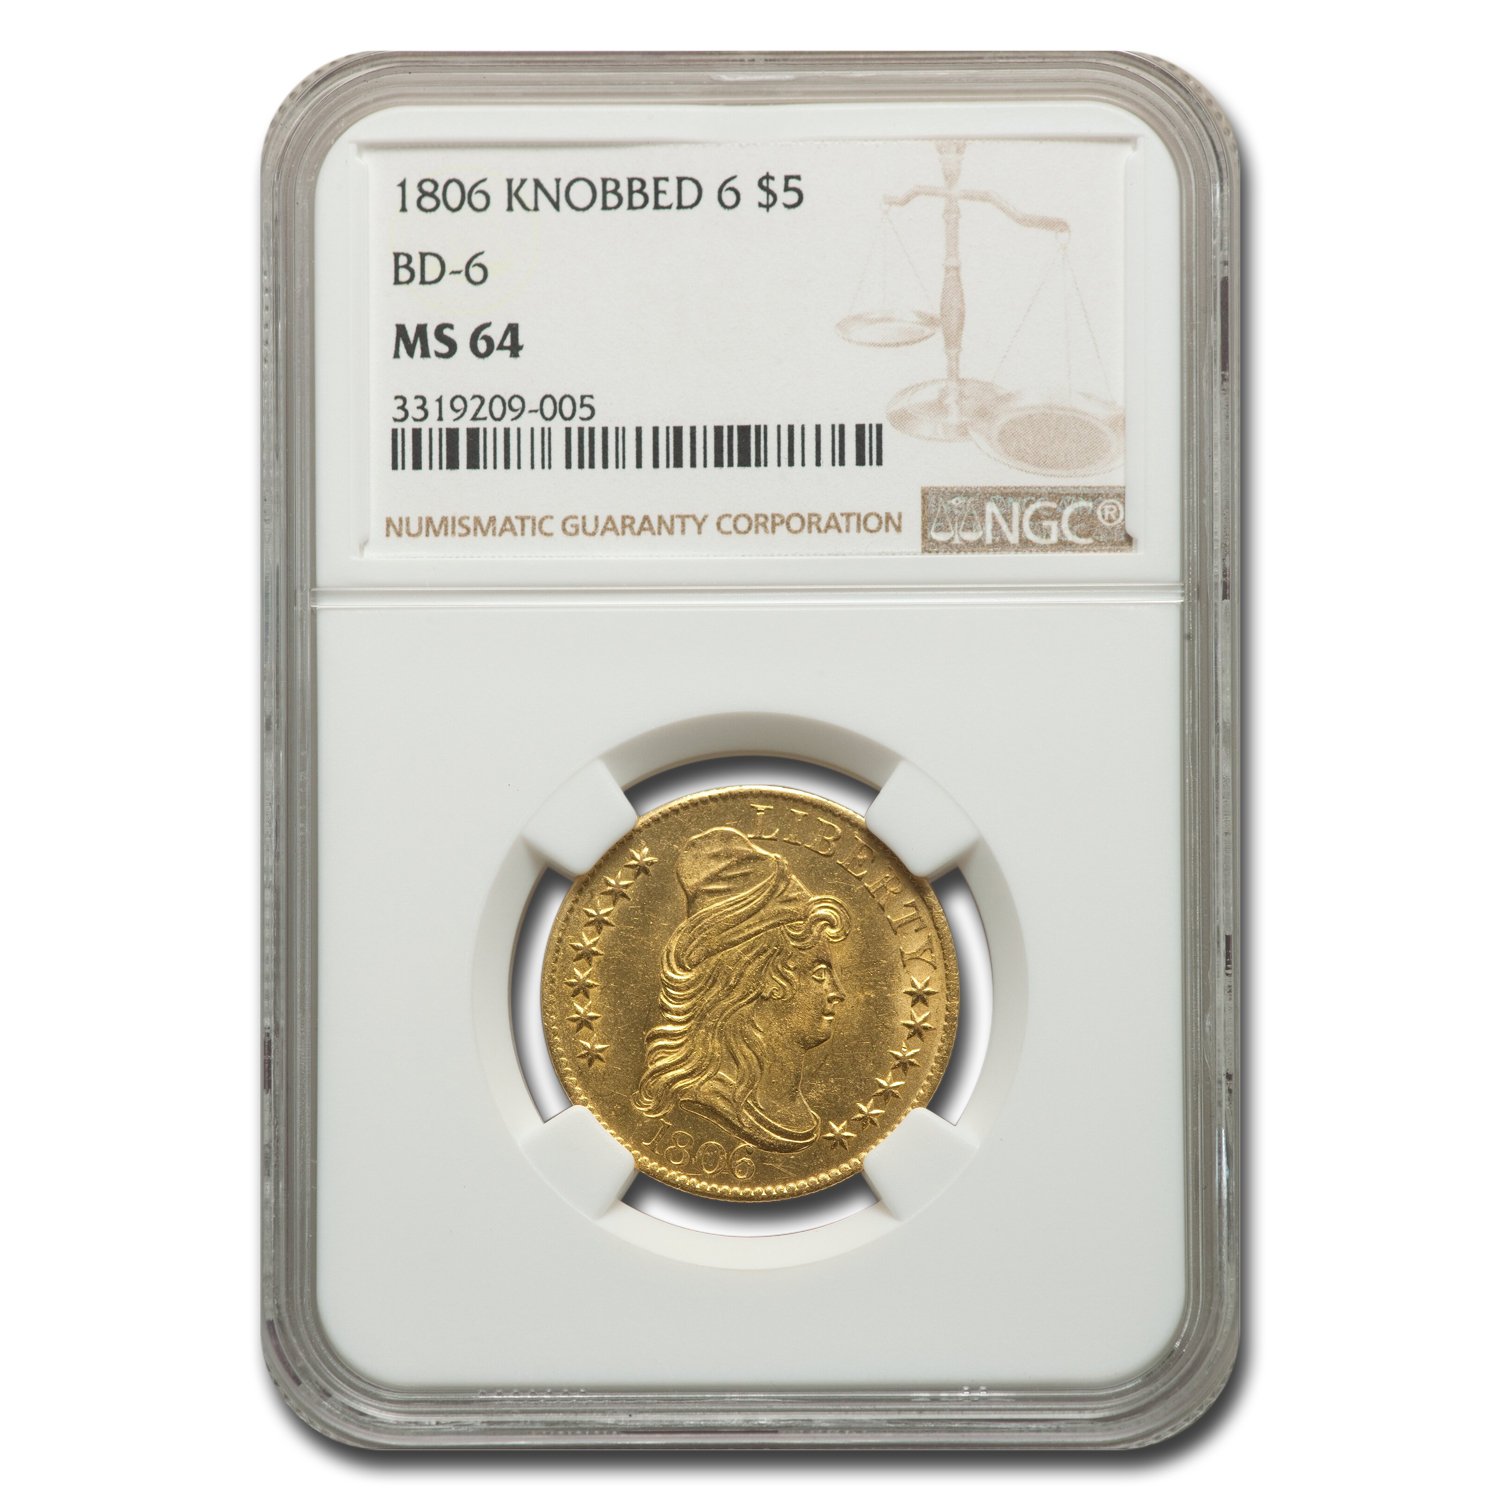 Buy 1806 $5 Capped Bust Gold Half Eagle Knobbed 6 MS-64 NGC (BD-6)